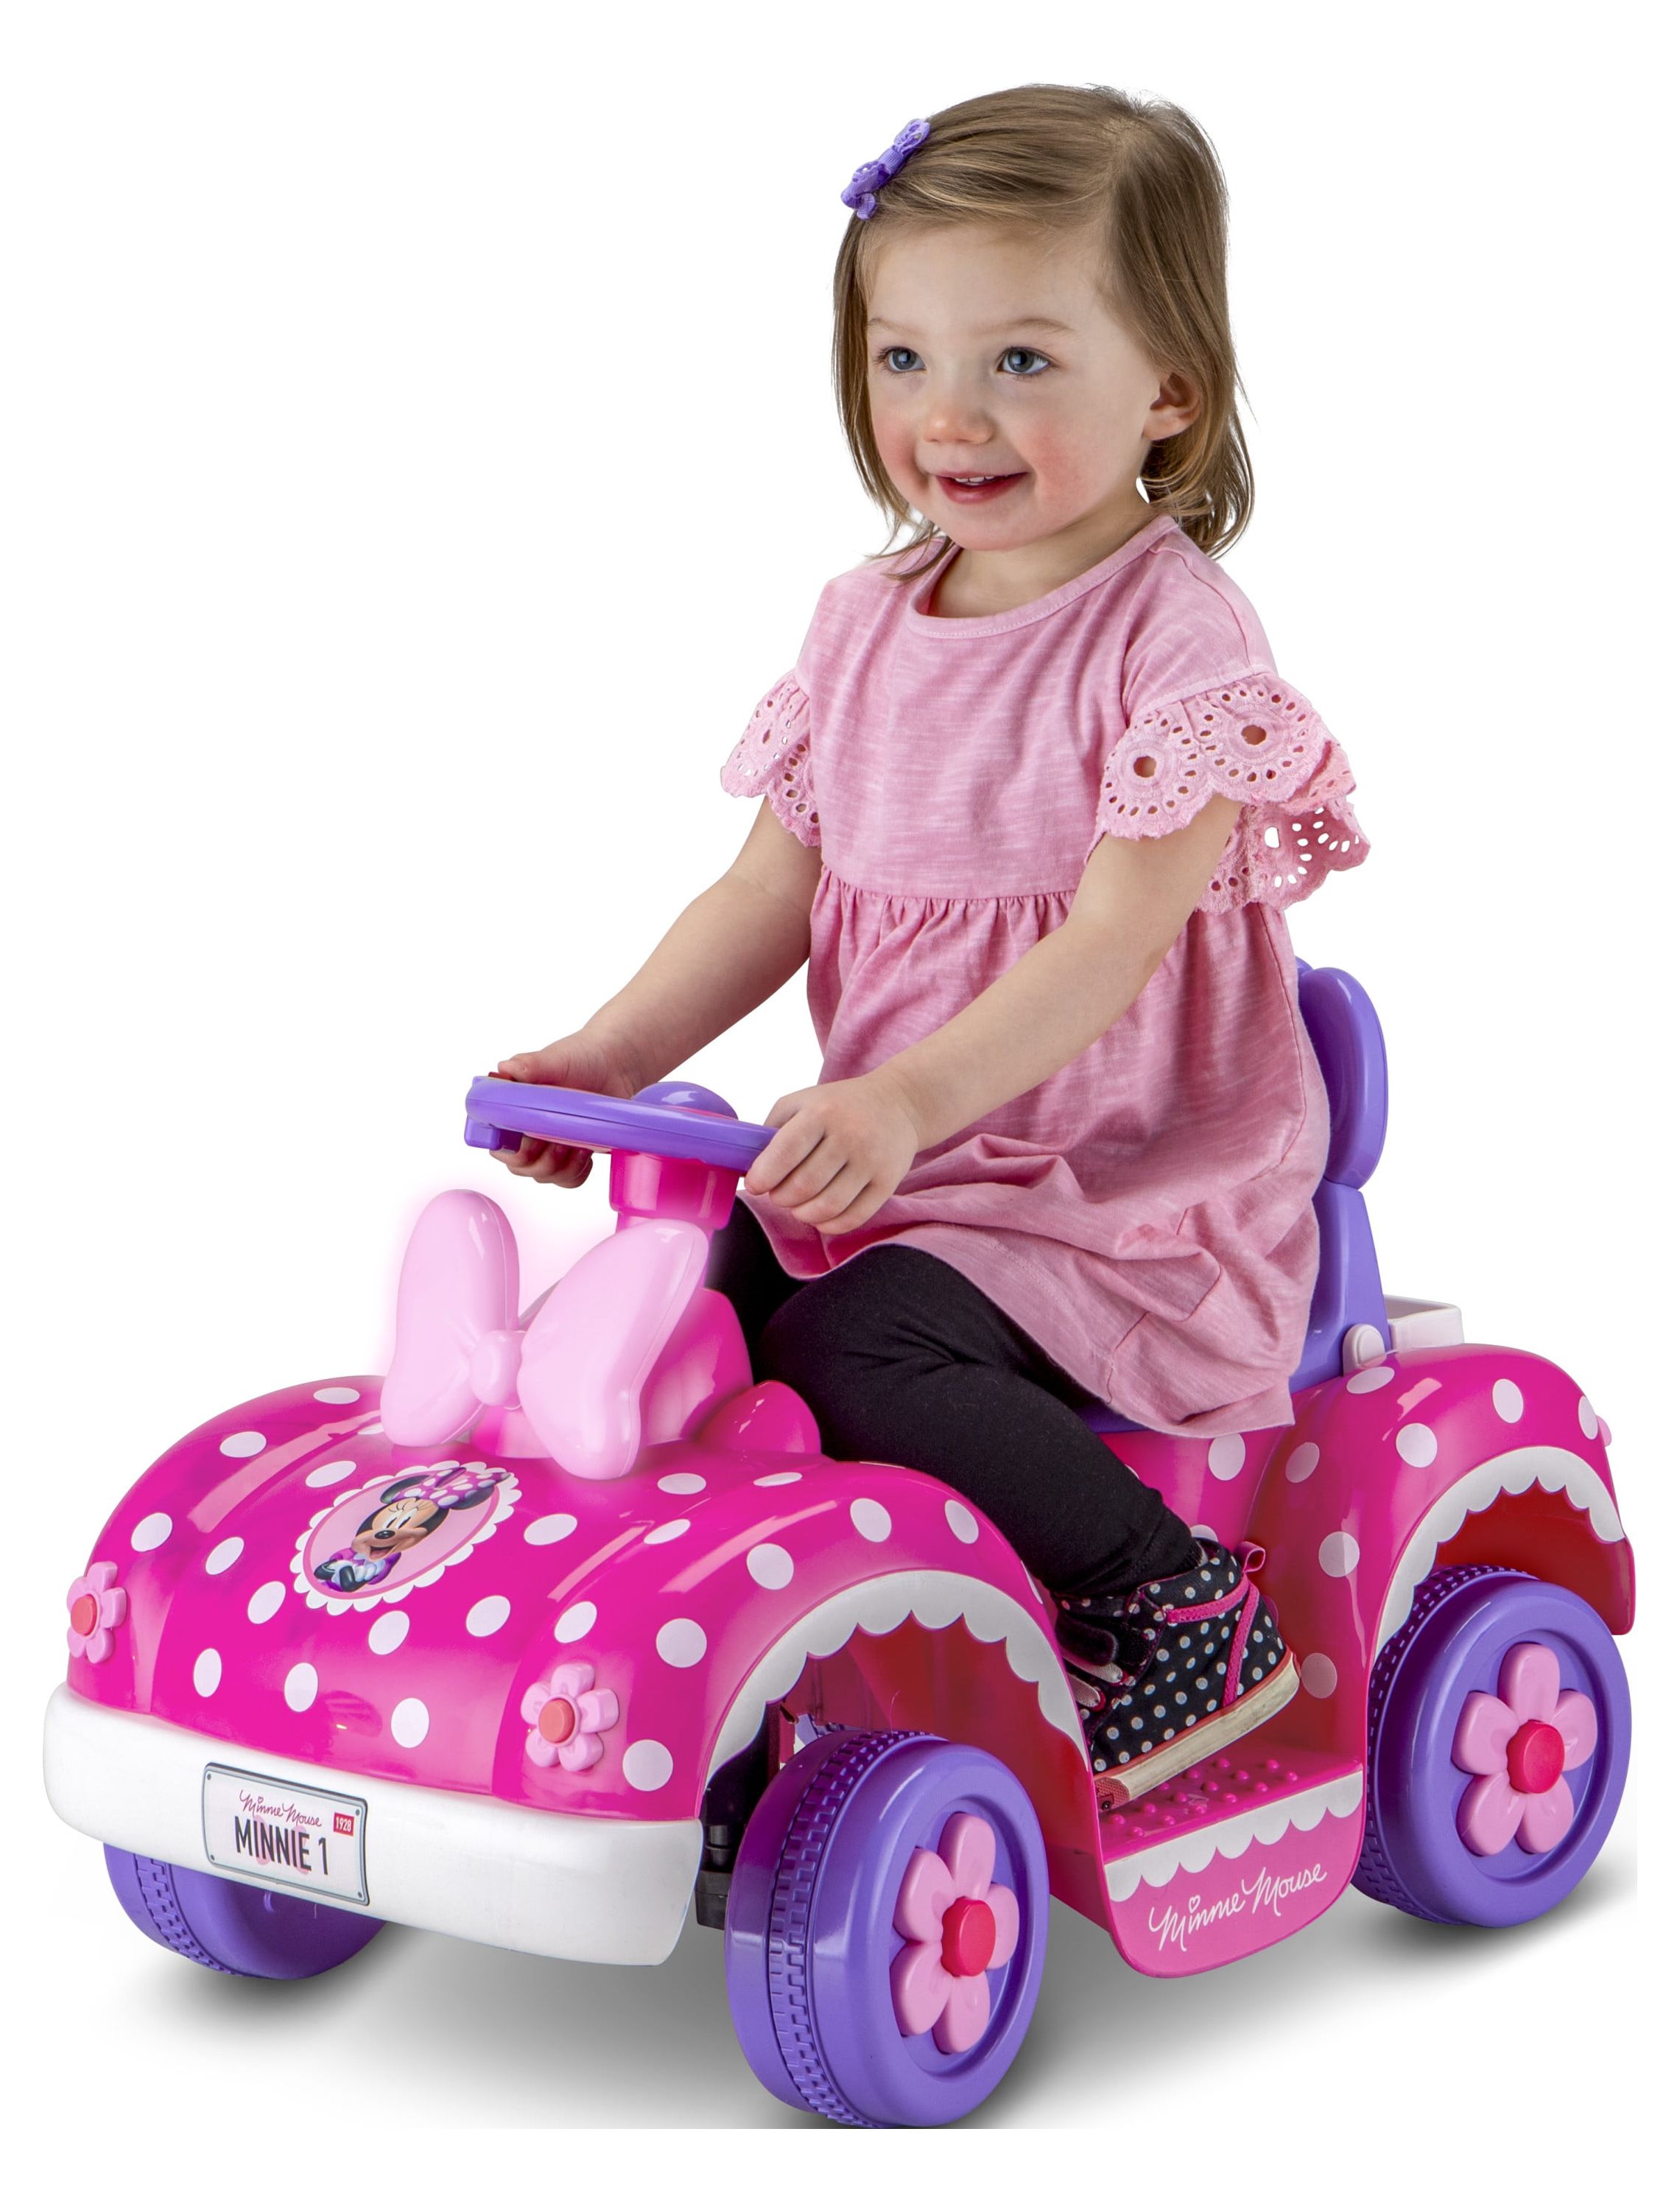 Disney Minnie Mouse Toddler Ride-On Toy - image 1 of 6